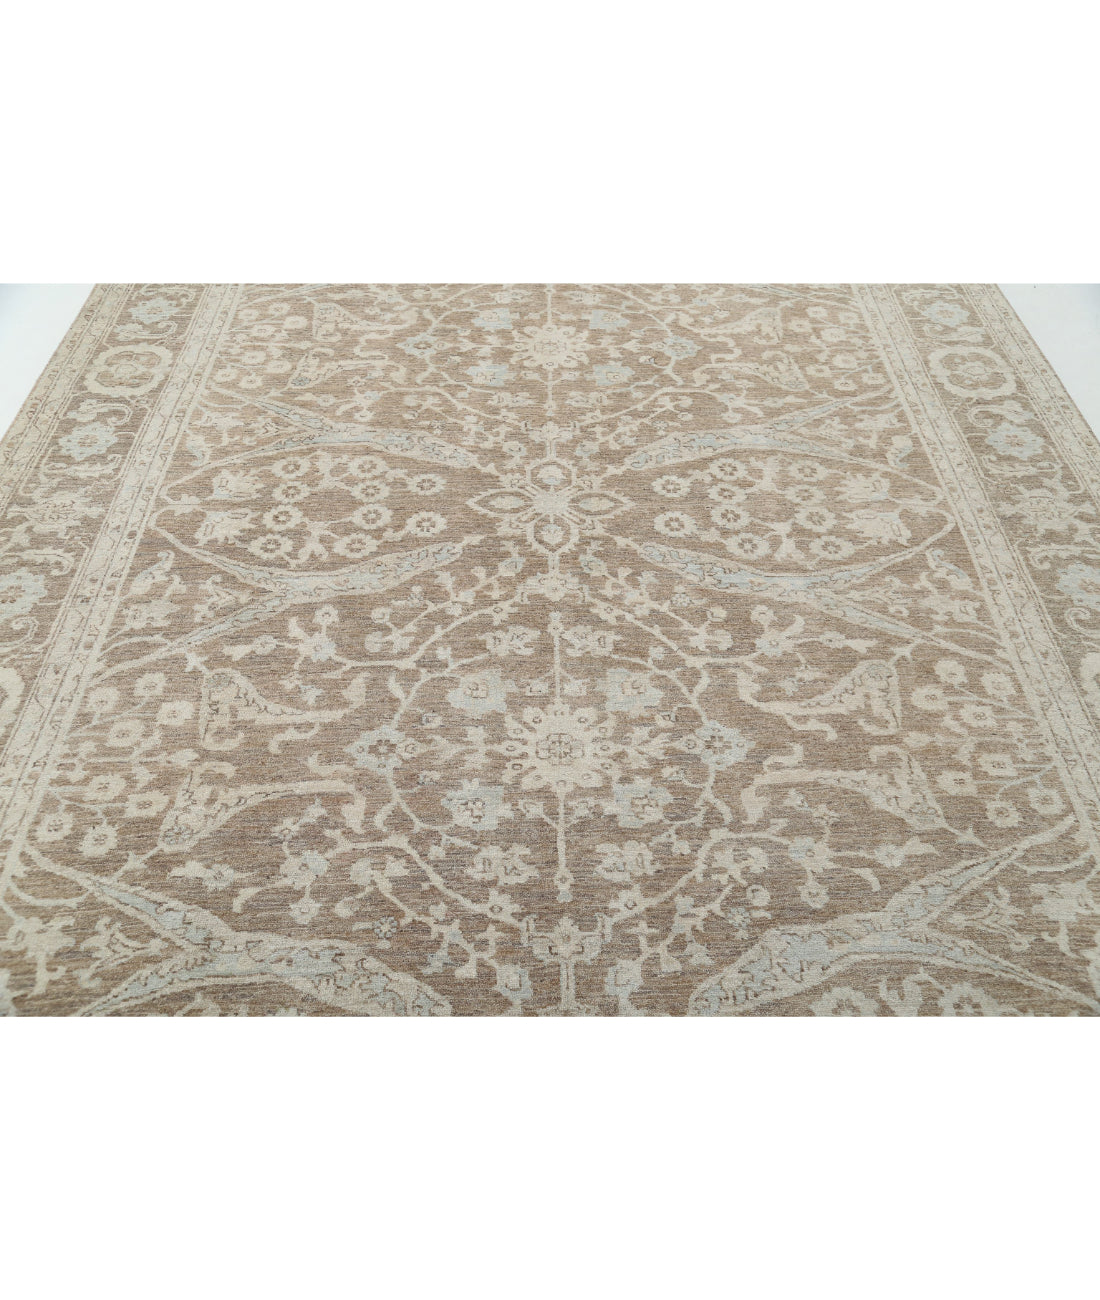 Hand Knotted Serenity Wool Rug - 8'3'' x 10'4'' 8'3'' x 10'4'' (248 X 310) / Brown / Ivory